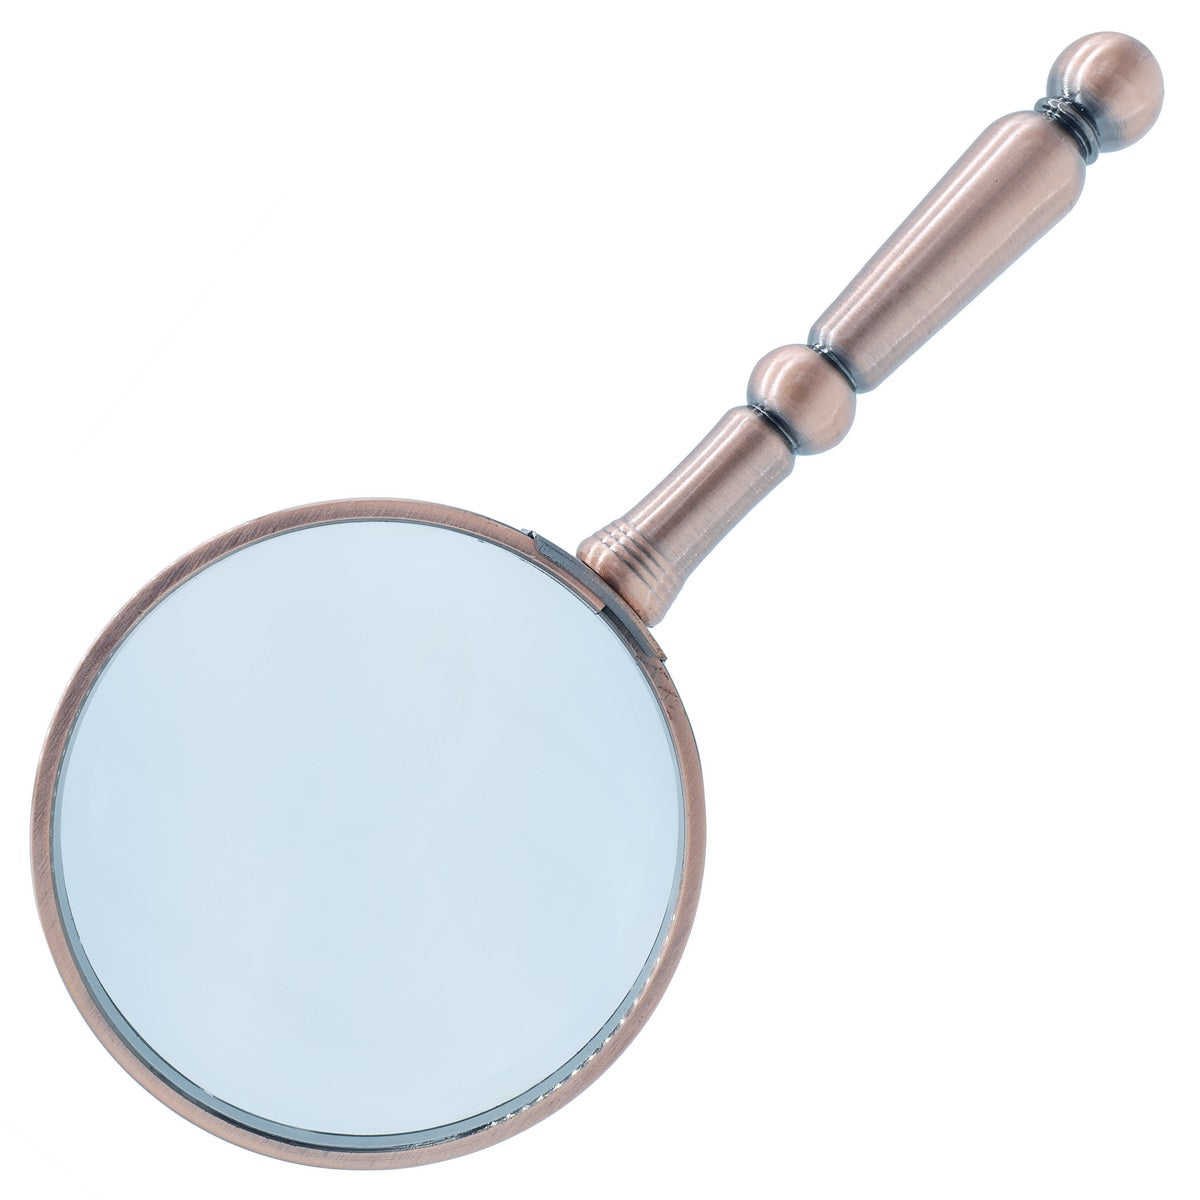 jags-mumbai Office Desk Stationery Magnified Glass 75mm Cooper MGCR75MM